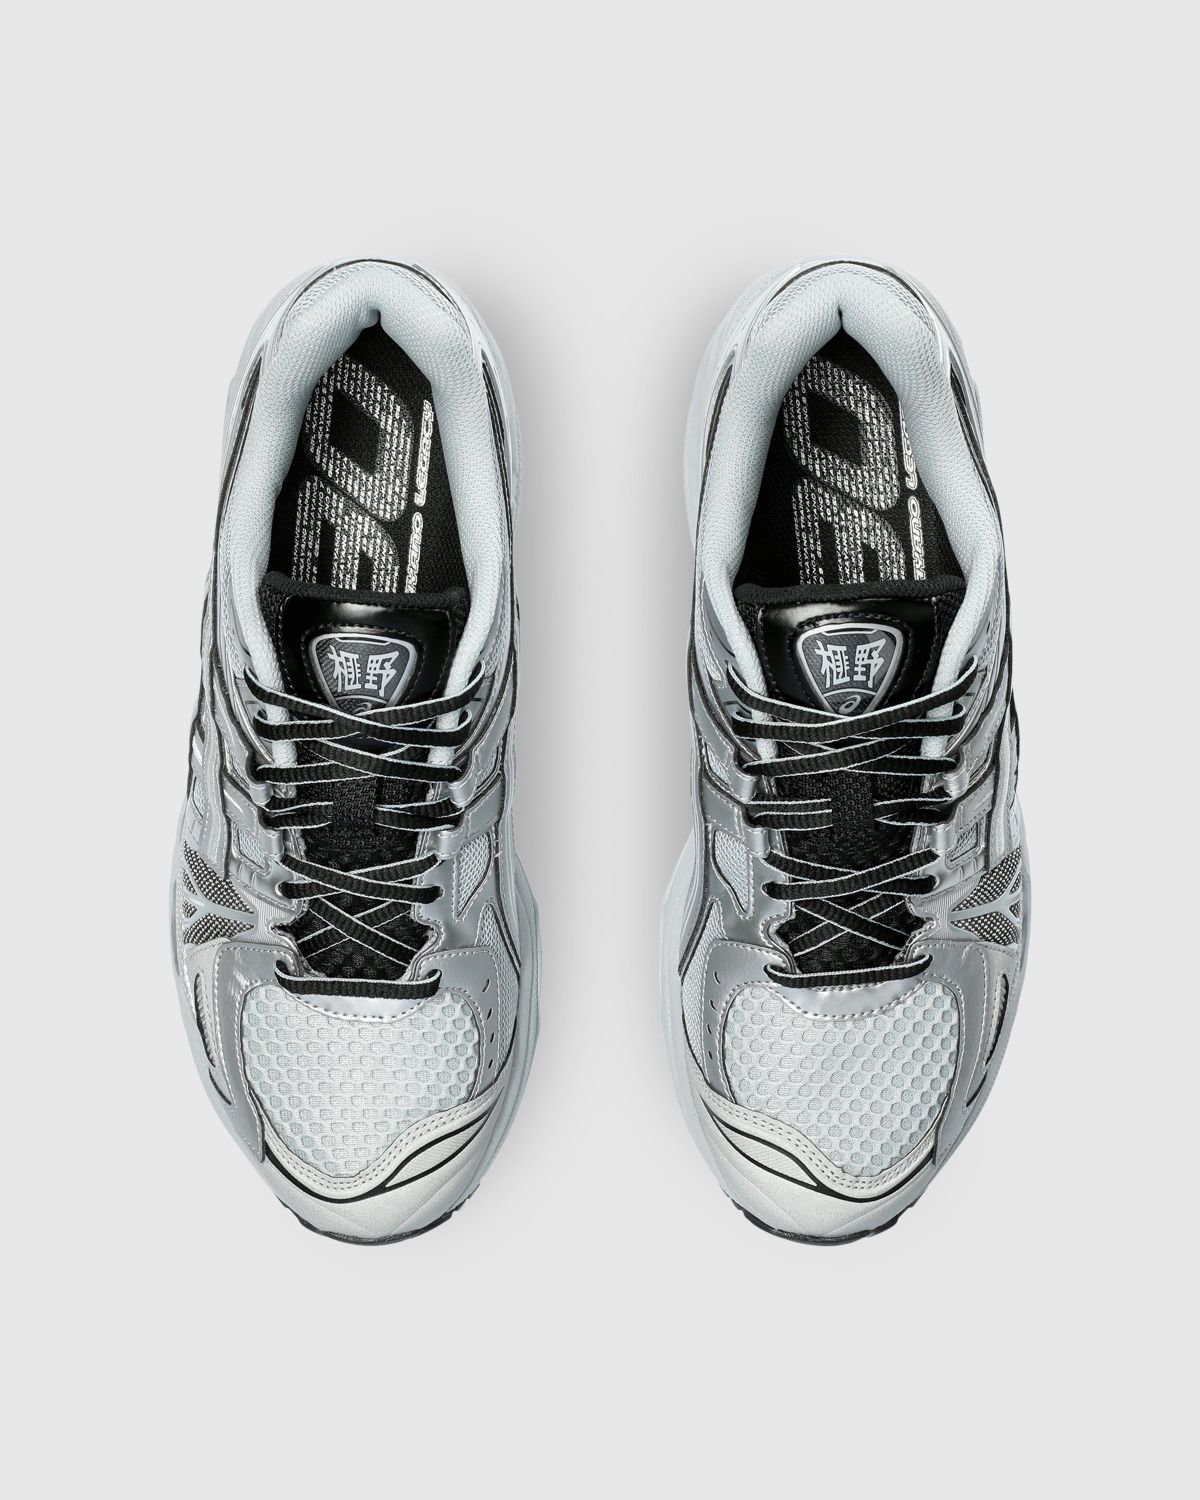 asics – GEL-KAYANO LEGACY Pure Silver - Sneakers - Silver - Image 5